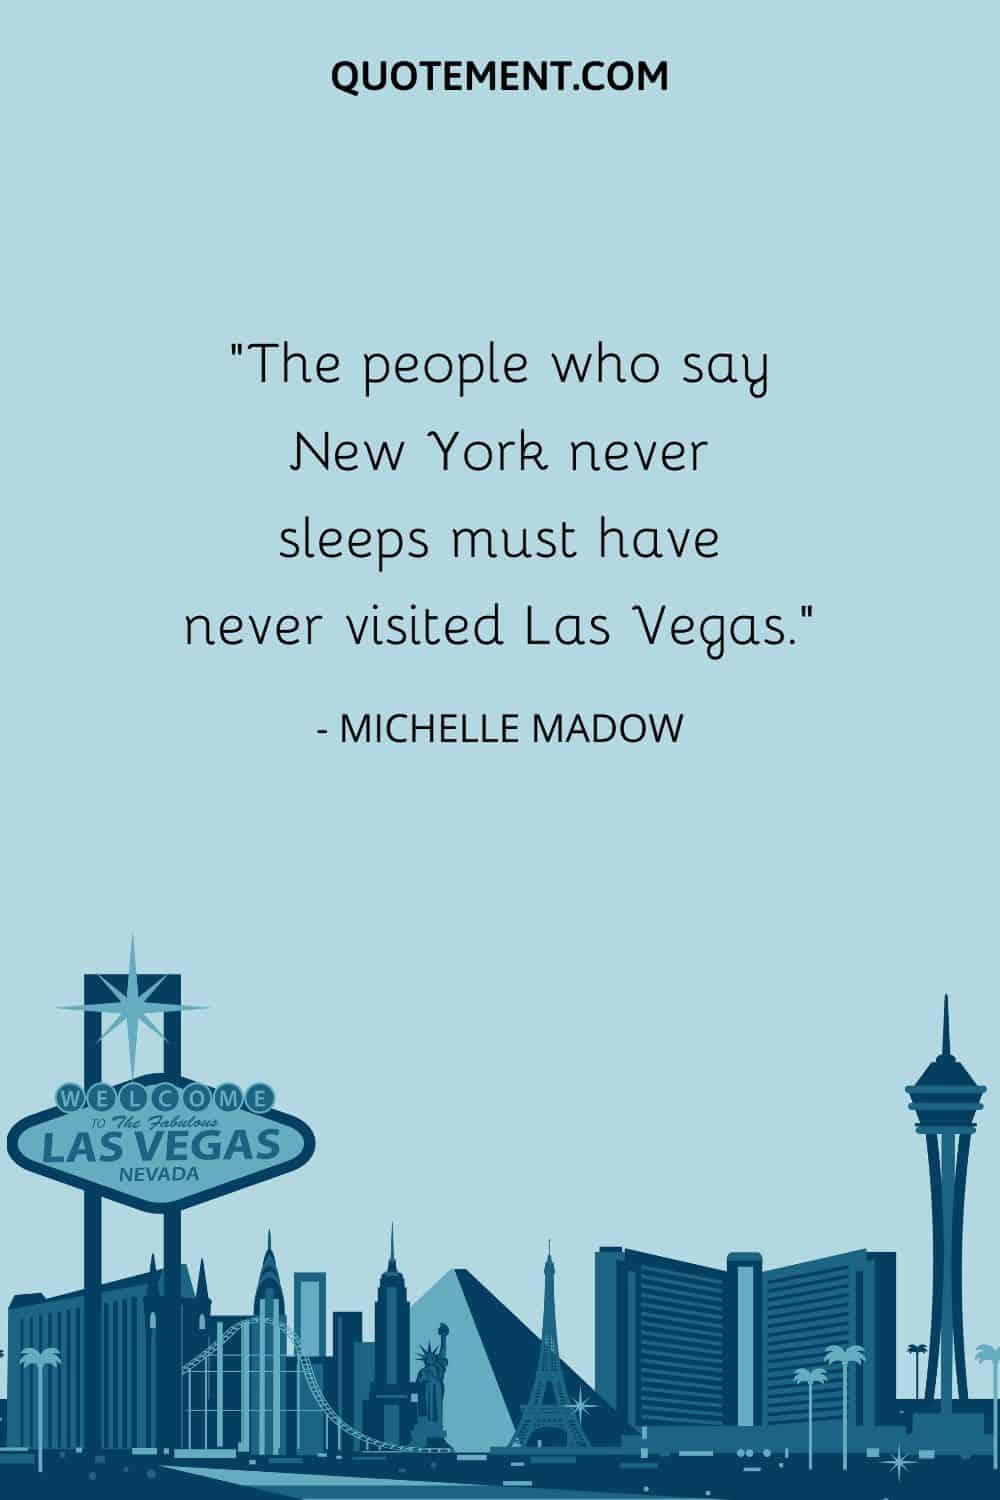 “The people who say New York never sleeps must have never visited Las Vegas.” — Michelle Madow